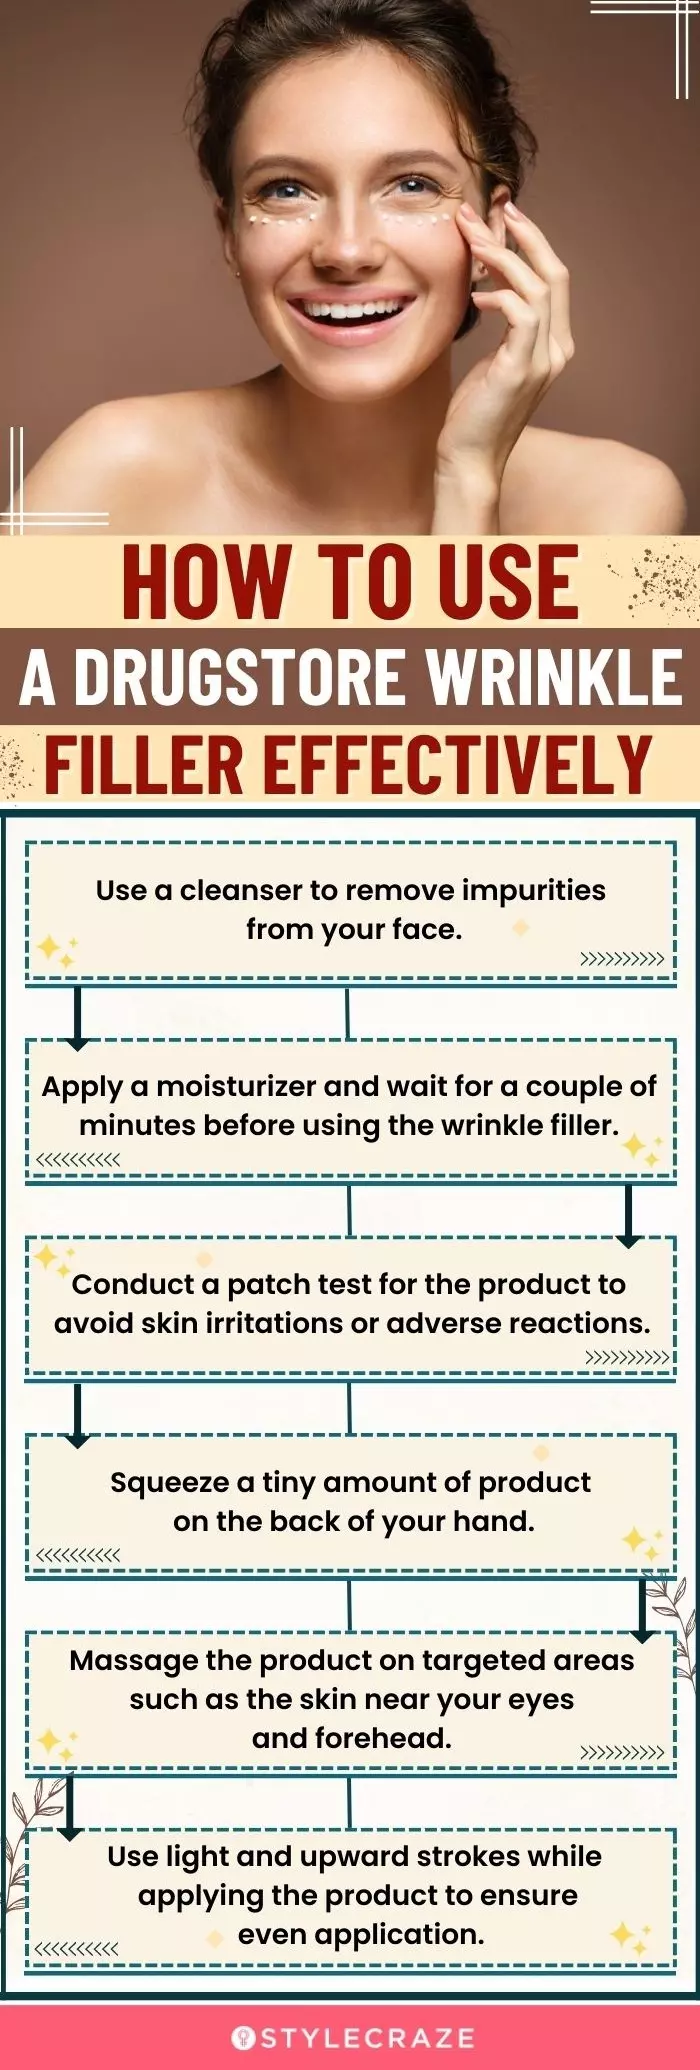 How To Use A Drugstore Wrinkle Filler Effectively (infographic)